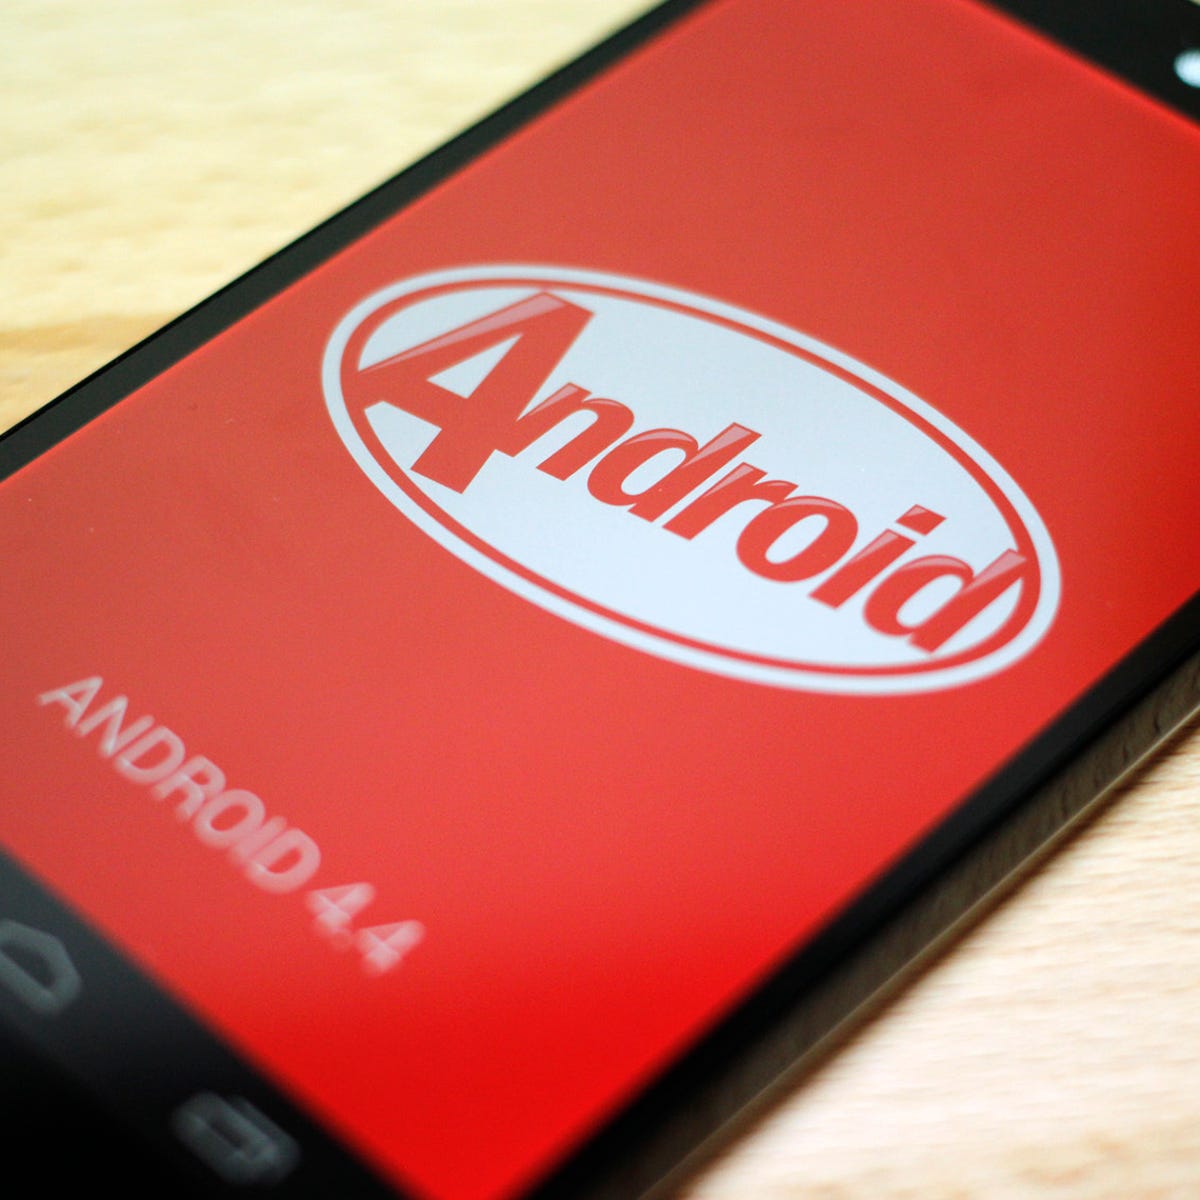 Oblong digestion servant How to record your screen on Android 4.4 KitKat - CNET